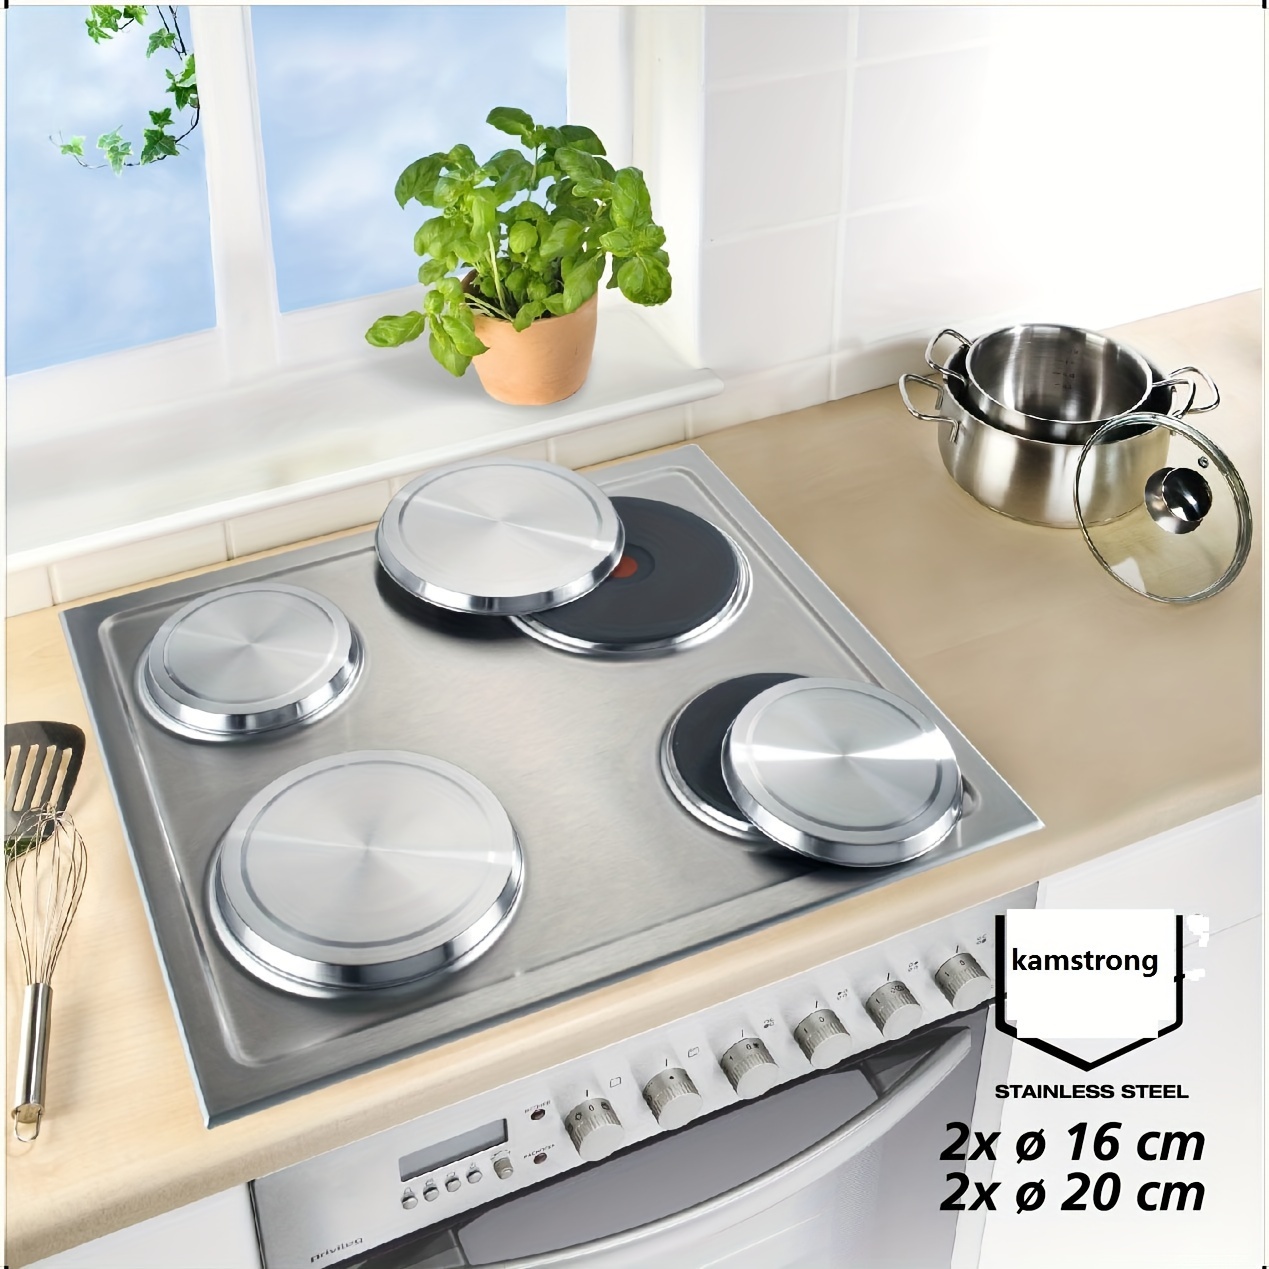 

Stainless Steel Stove Burner Covers Set Of 4 - Kitchen Utensil Accessories For Electric Stove Top - Durable Home Cookware Cover Set For Induction Cooktops